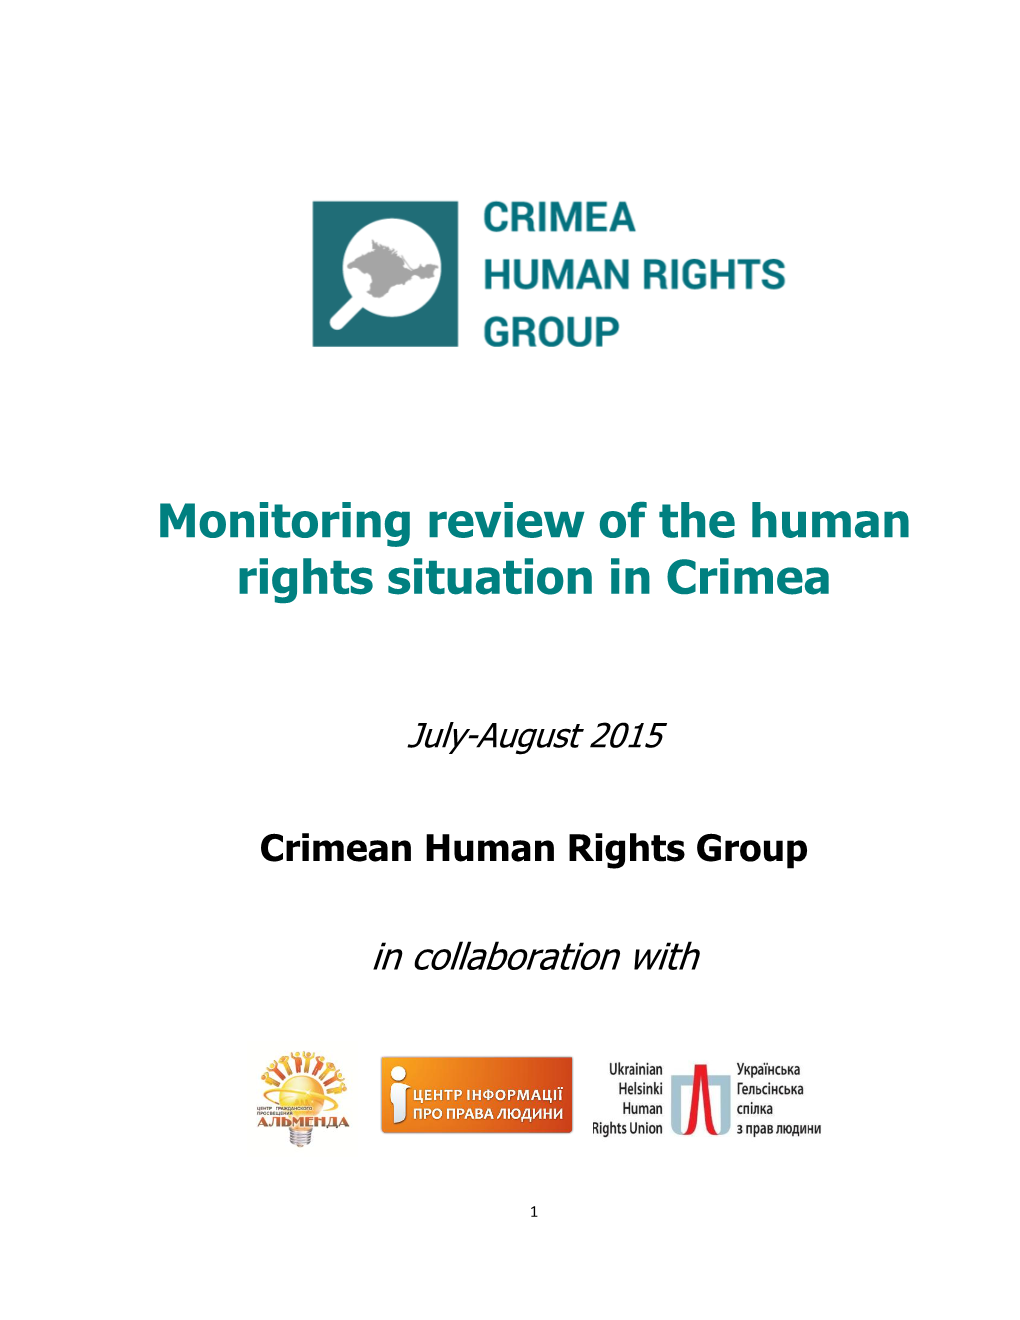 Monitoring Review of the Human Rights Situation in Crimea